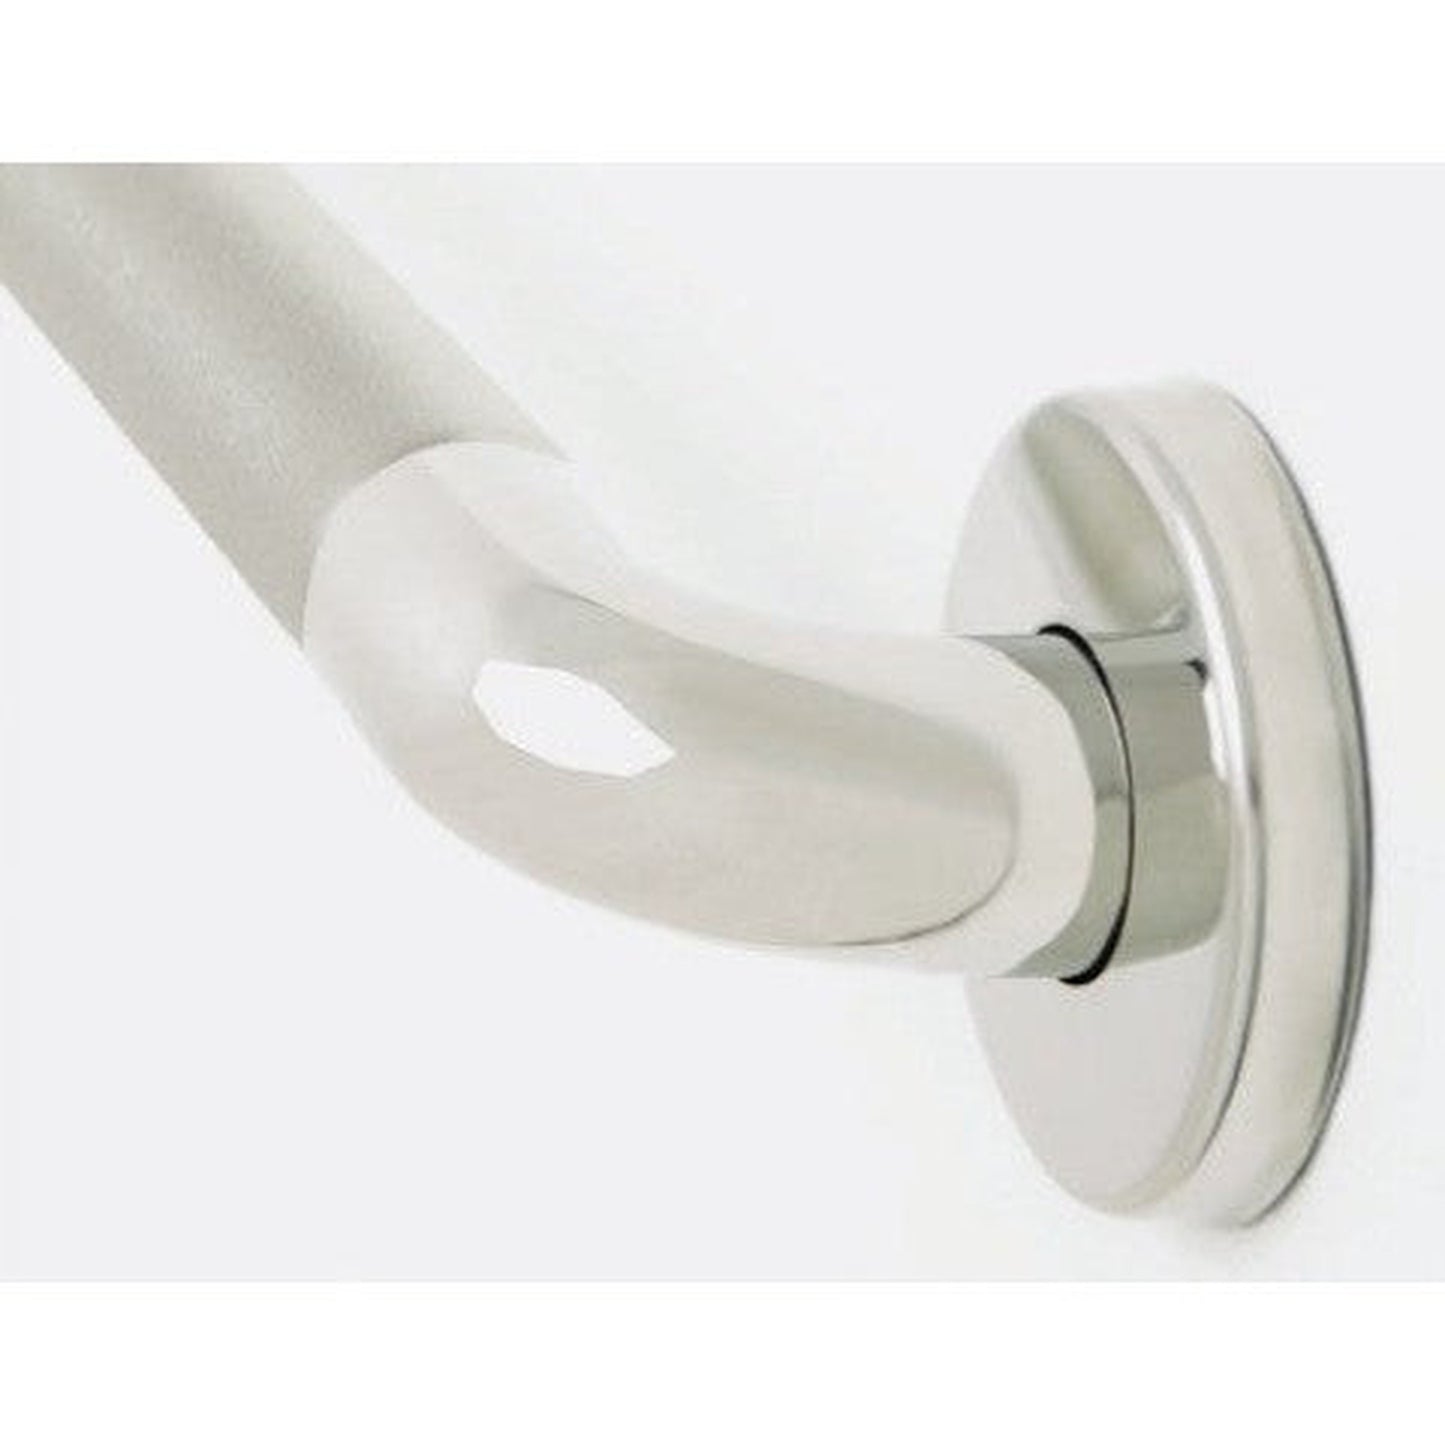 Seachrome Signature Series Value Line IGZS 42" Peened Stainless Steel With Polished Ends 1.25" Tube Diameter Concealed Flange Grab Bar